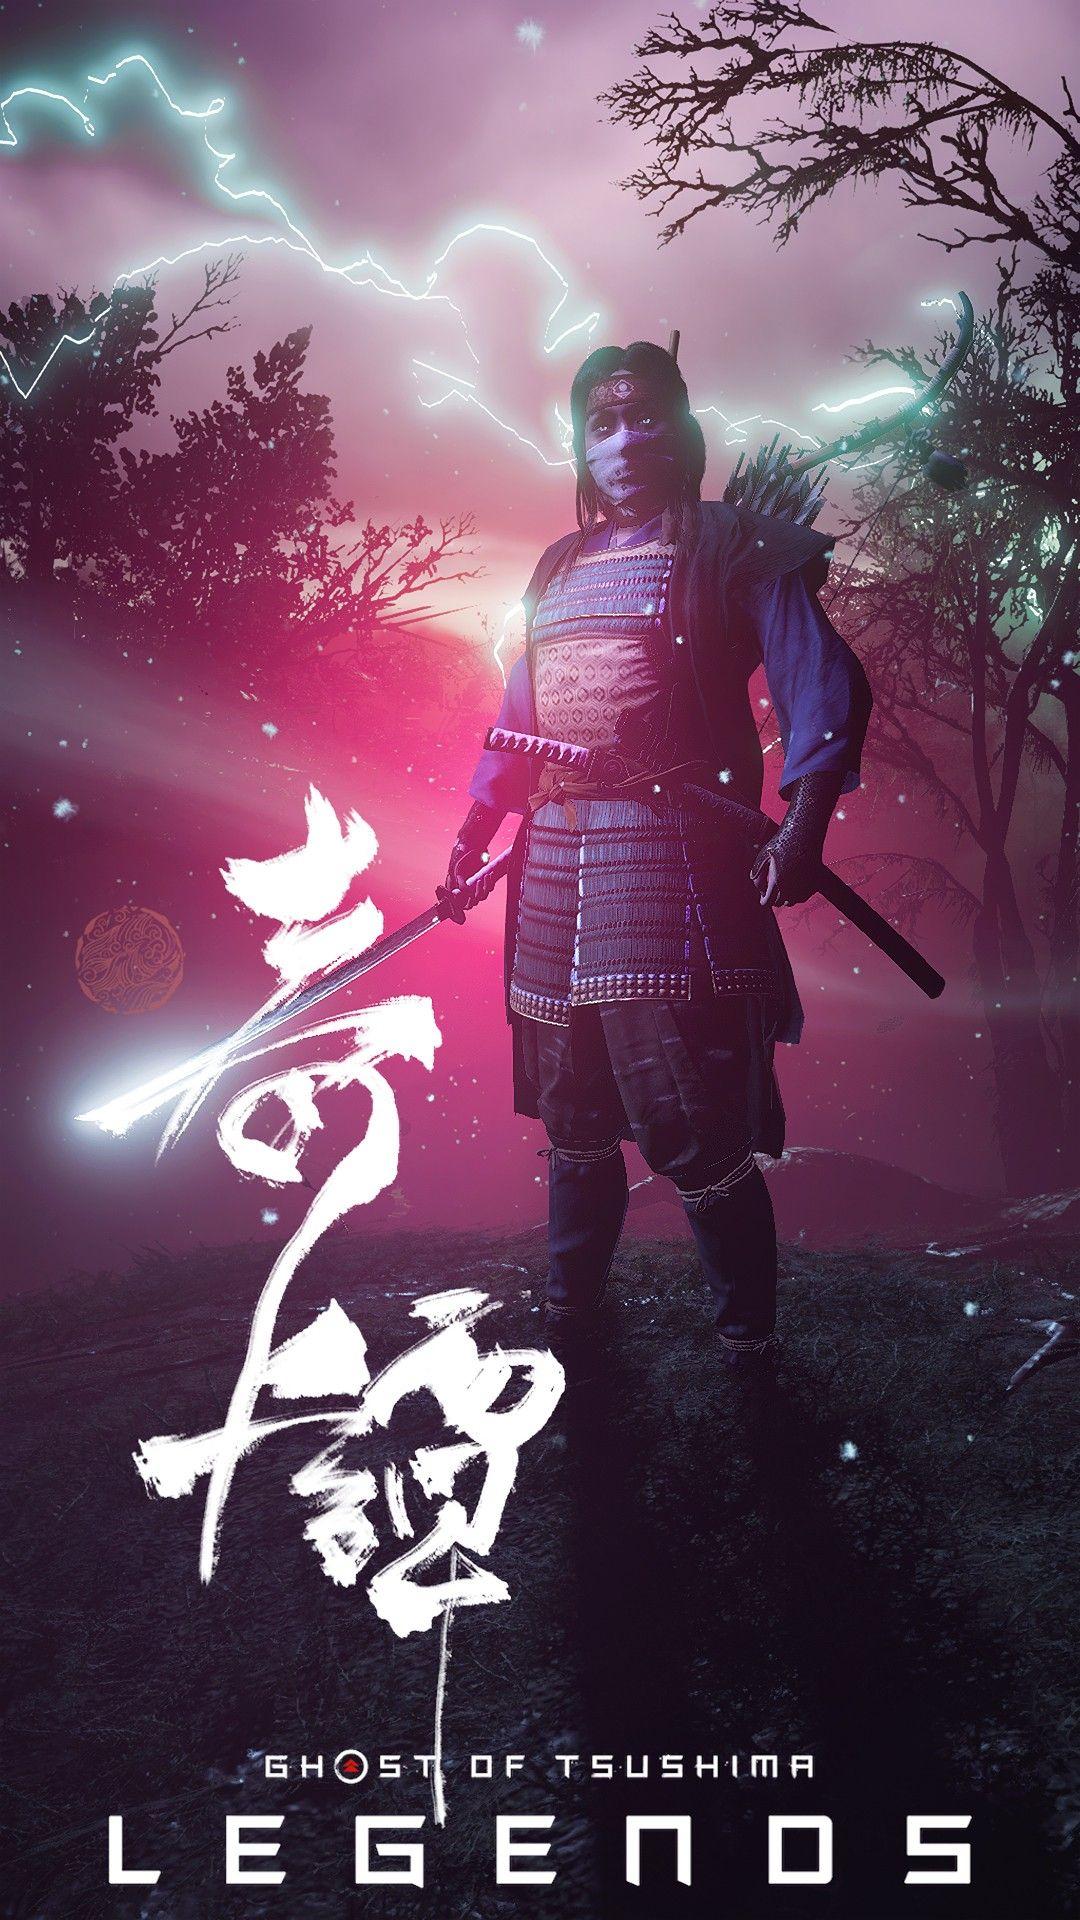 Wallpaper ID 427489  Video Game Ghost of Tsushima Phone Wallpaper   750x1334 free download